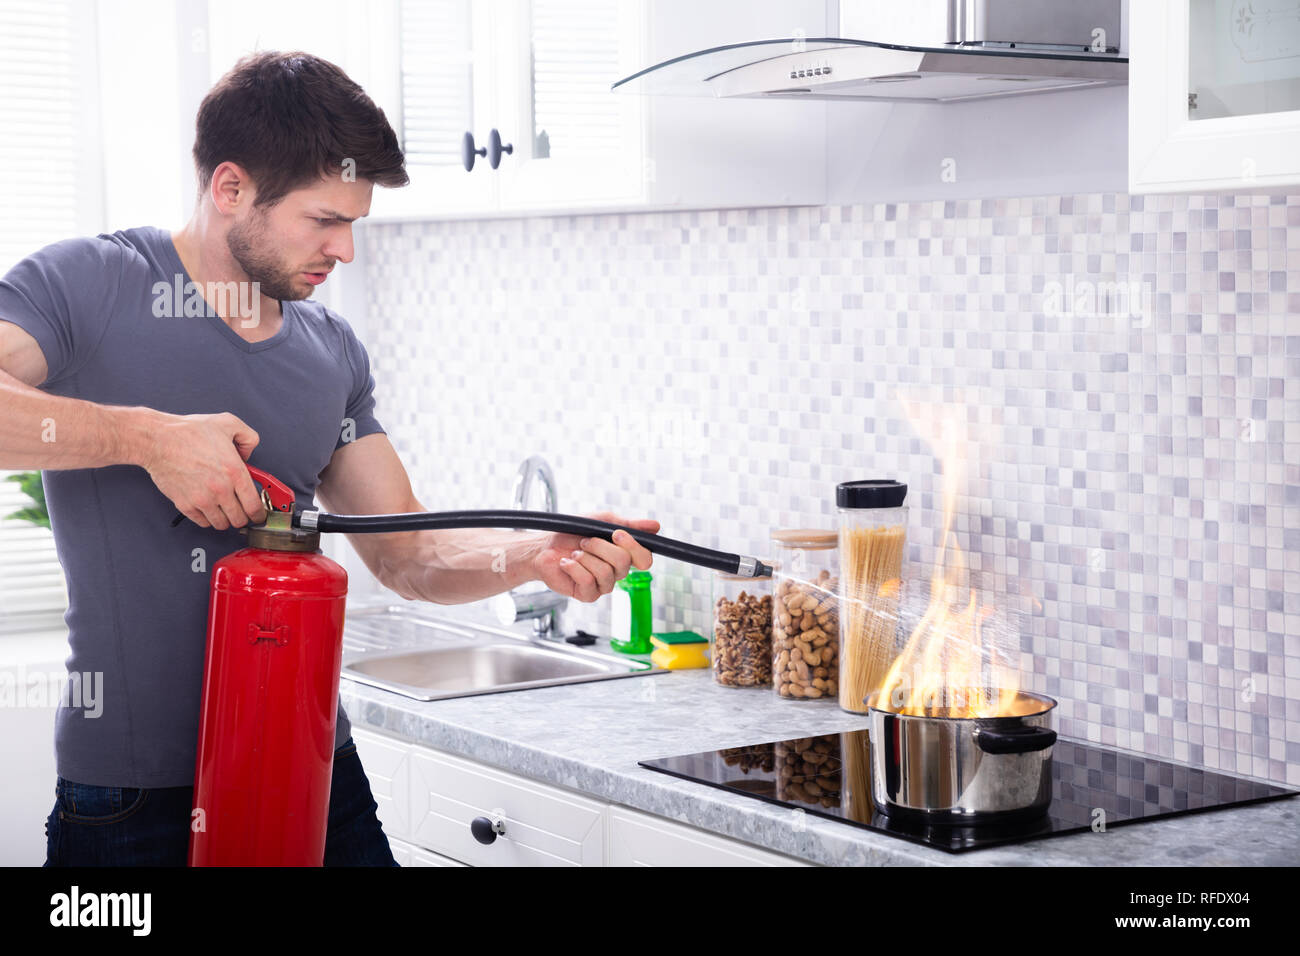 Fire Extinguisher Kitchen High Resolution Stock Photography And Images Alamy